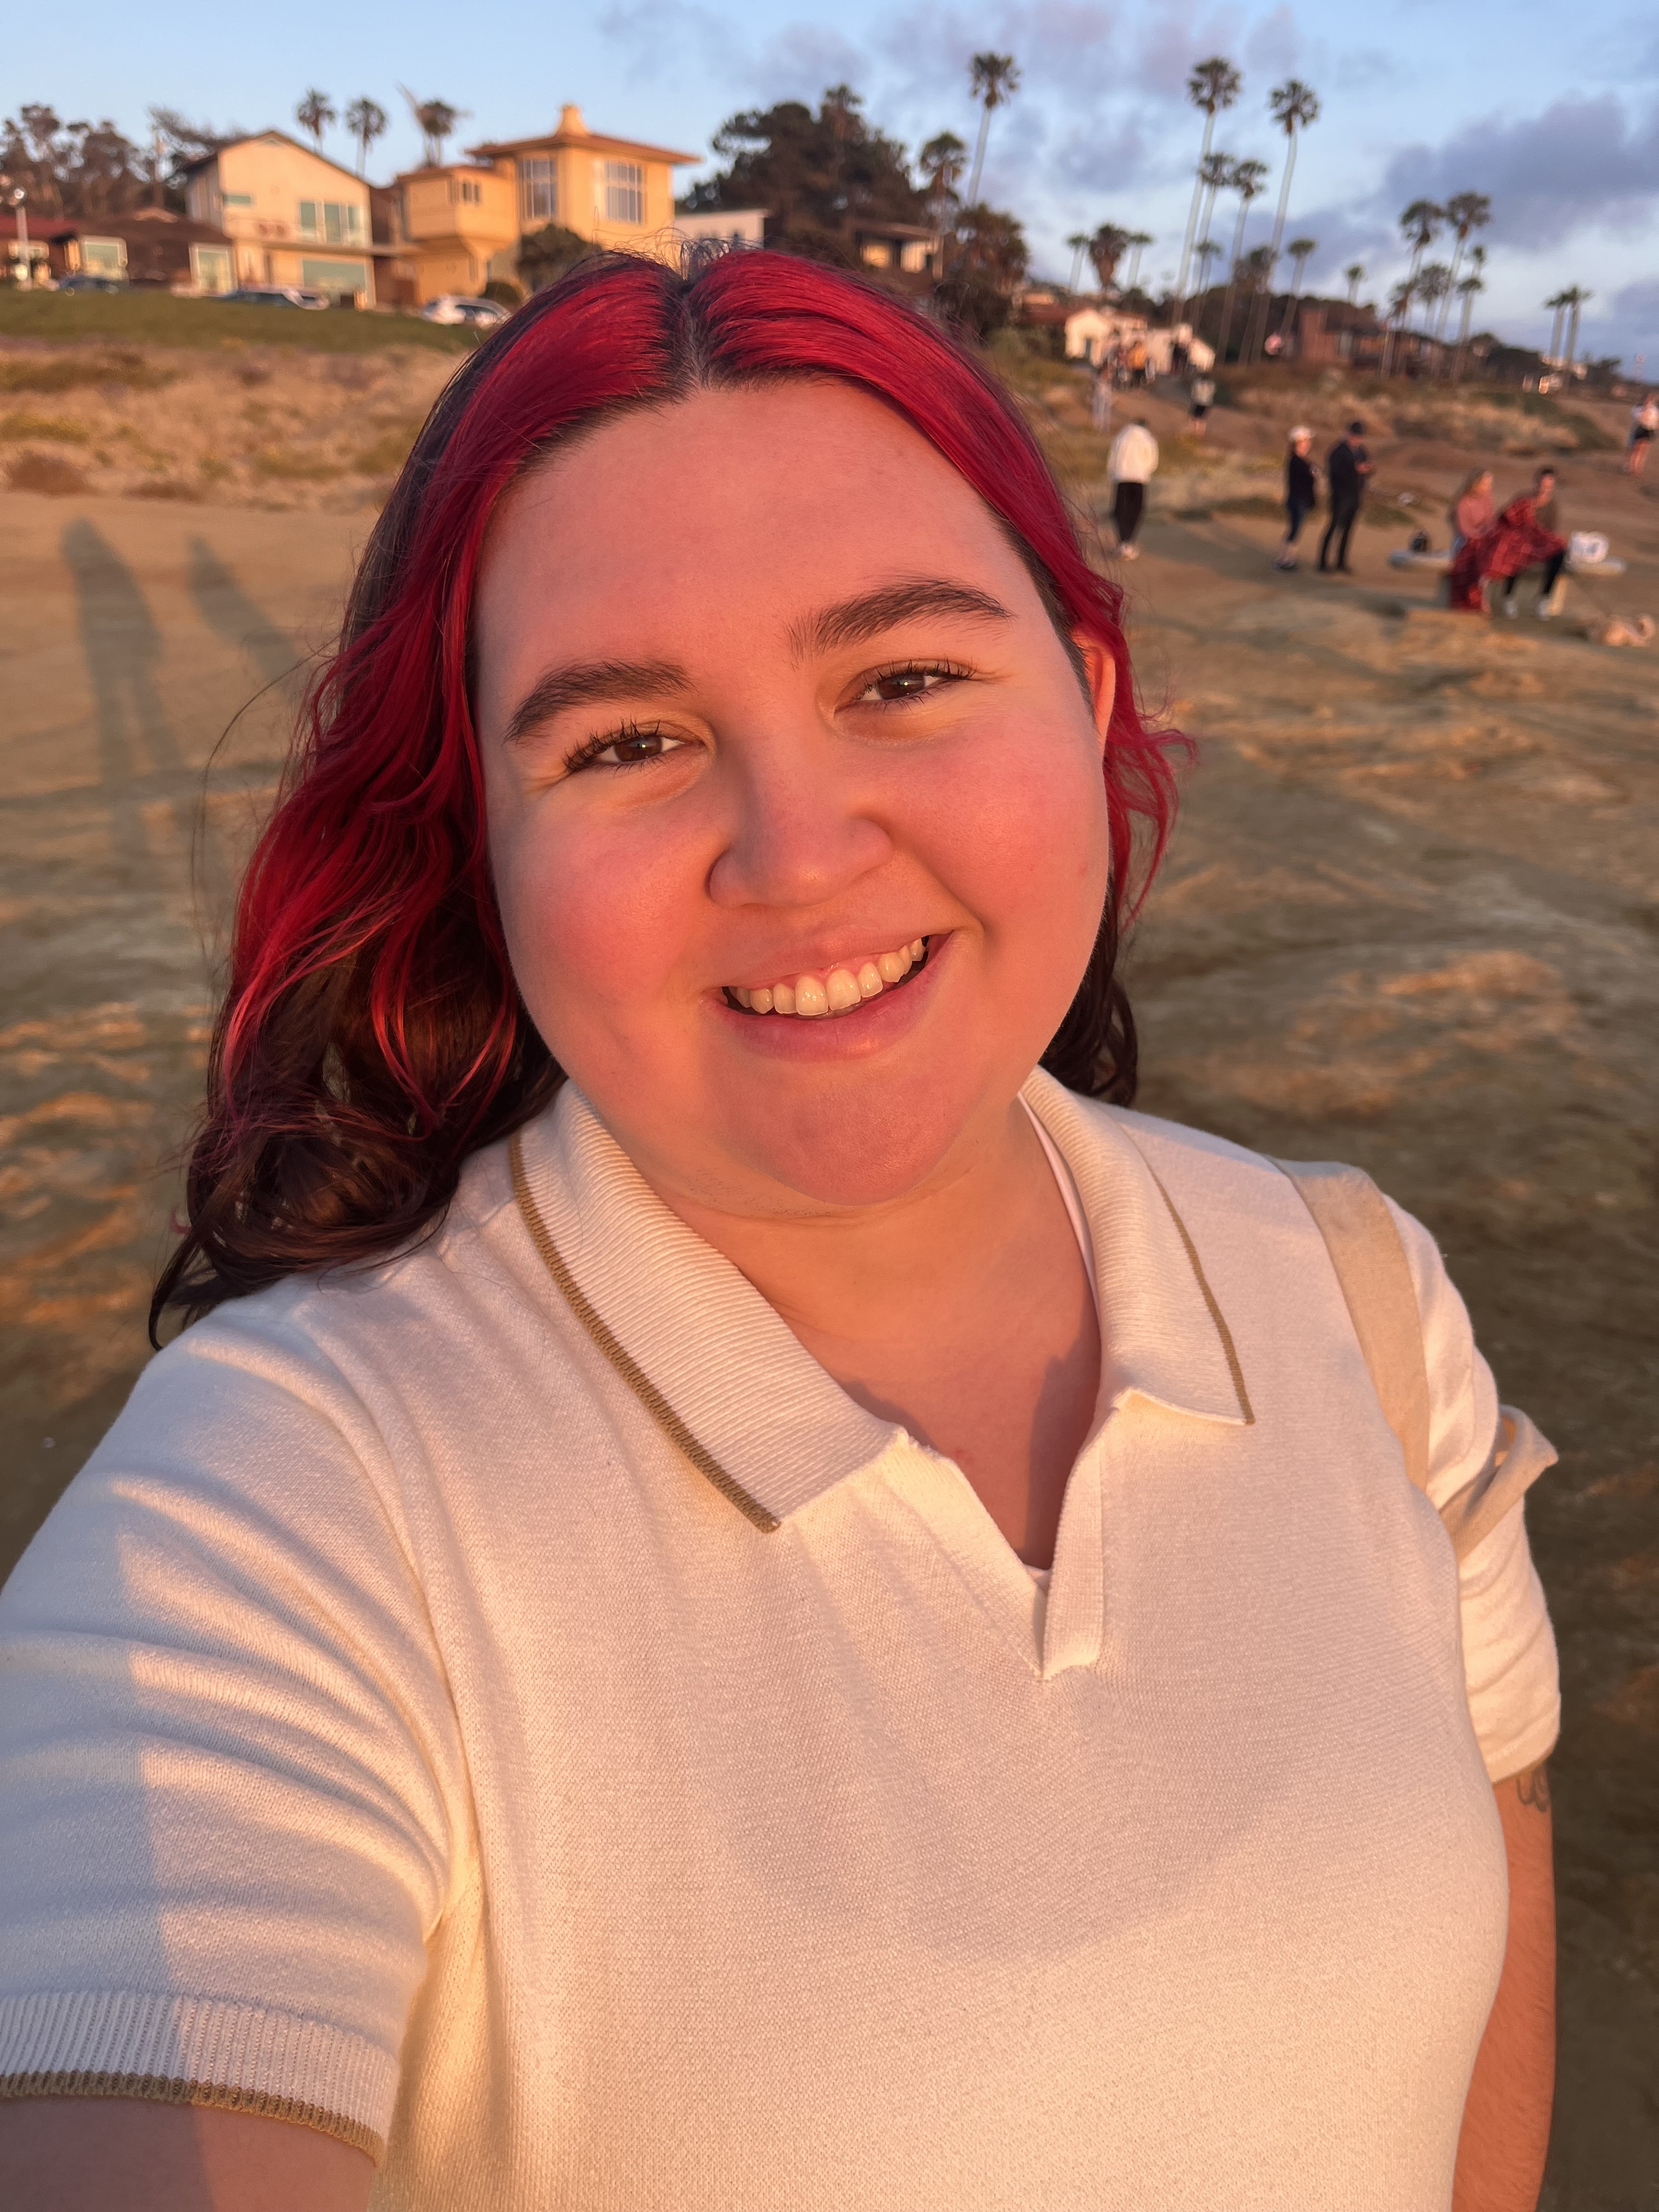 headshot of Latinx person at a beach, wearing a white button up shirt with dyed red hair.